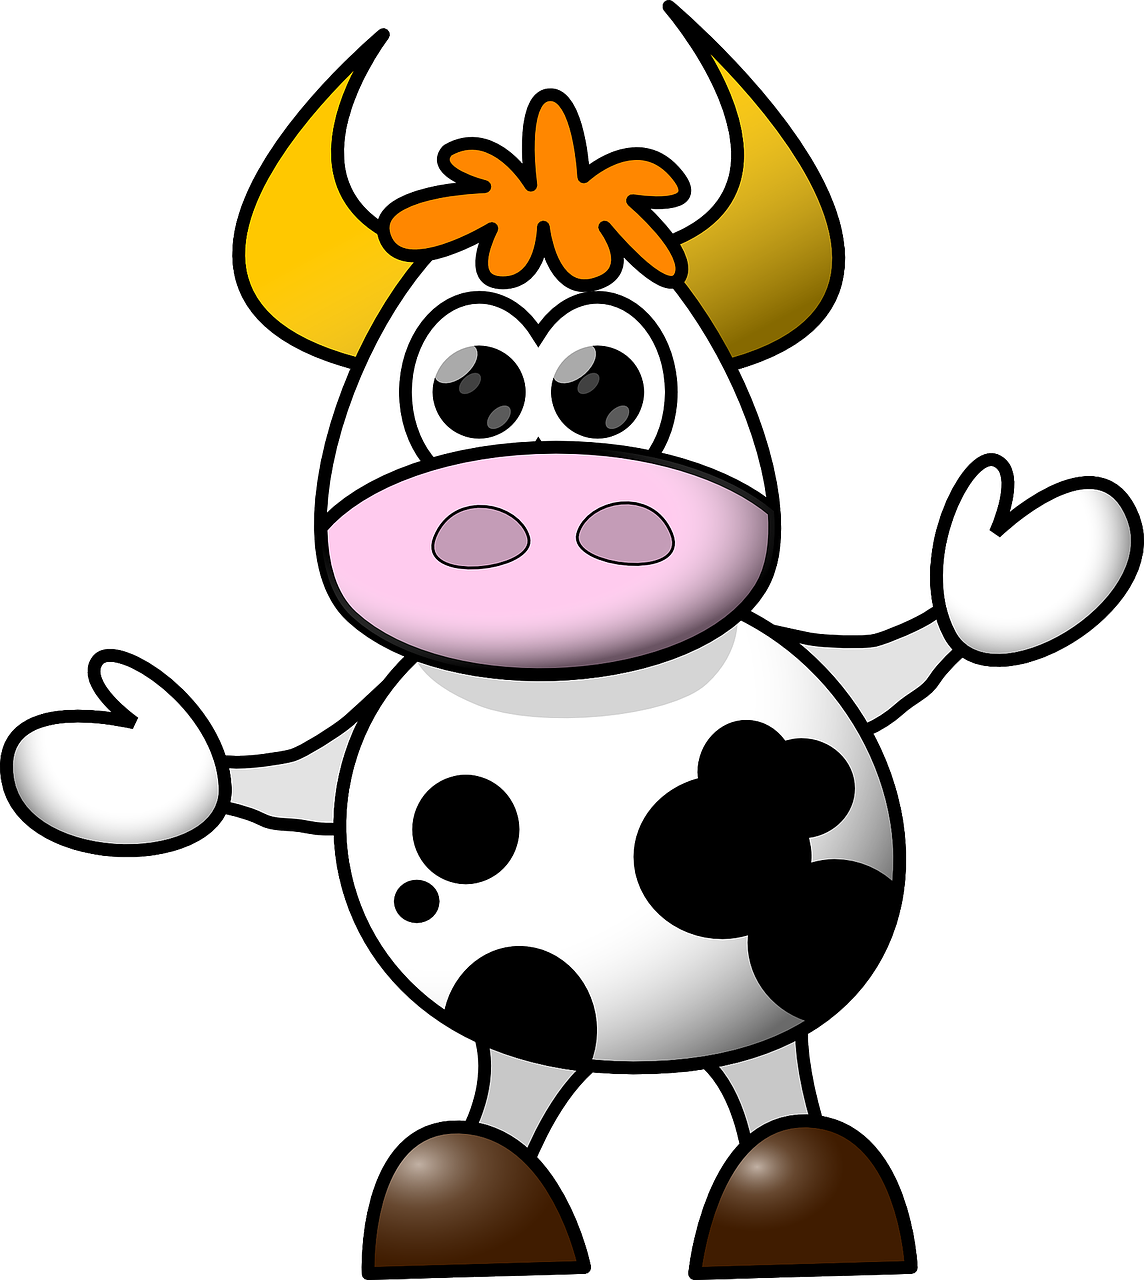 Cow Cartoon Funny Cute Dancing Isolated - Animated Cow (1144x1280)